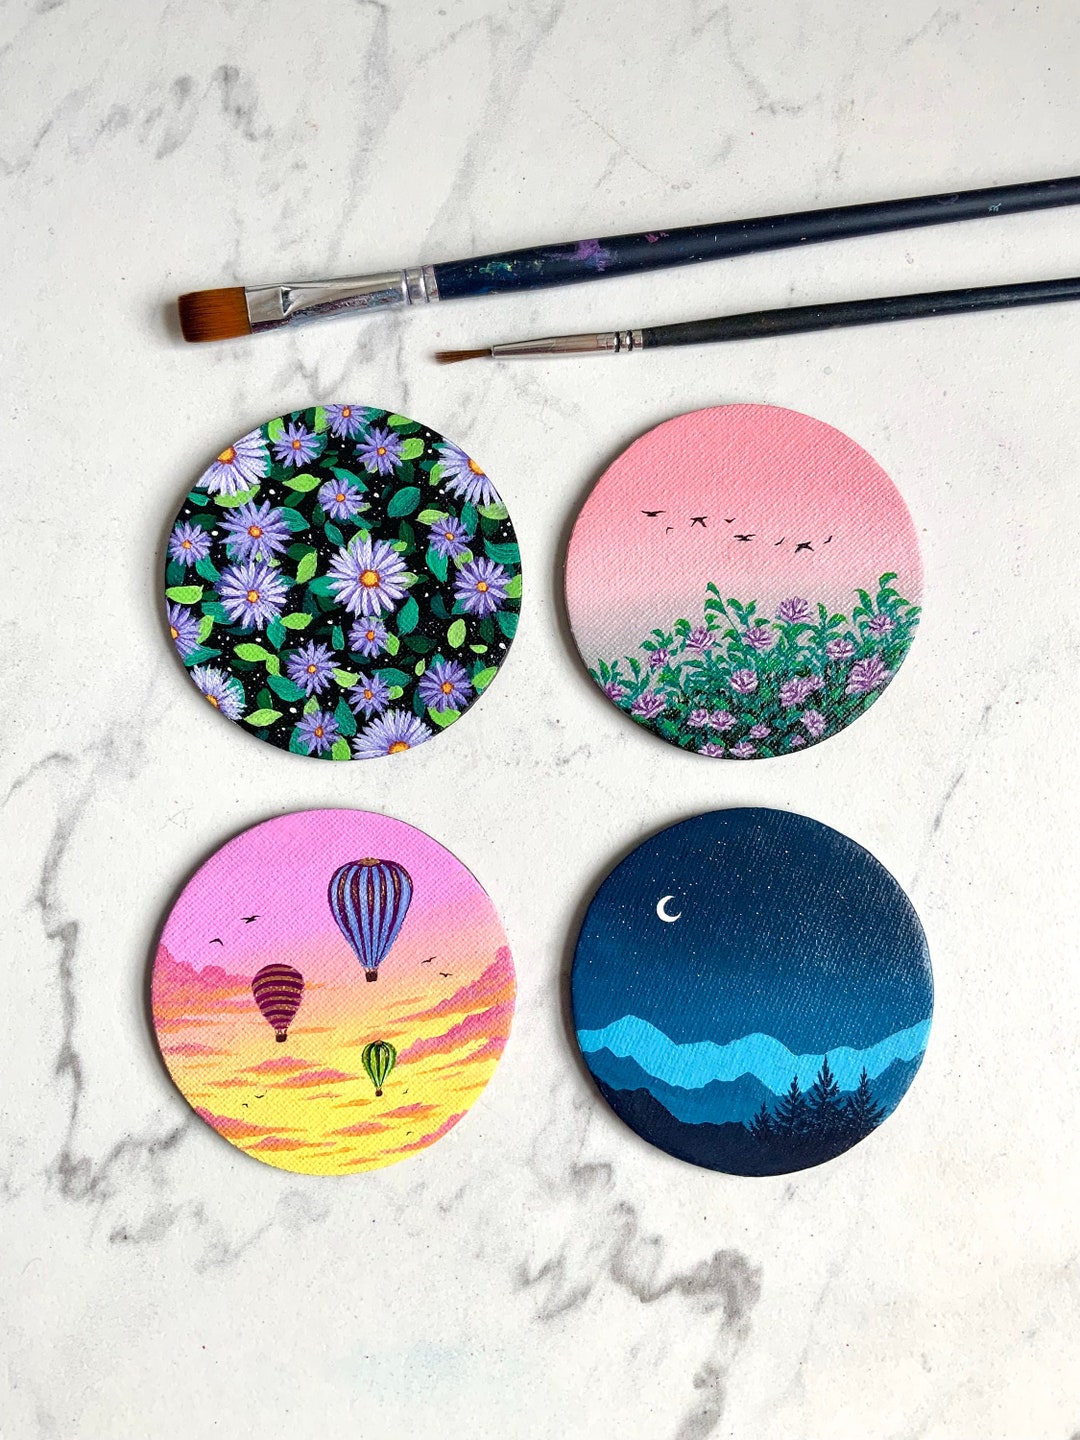 Magnetic Art Paintings 3x3 Inches Painting Magnets Decor Original